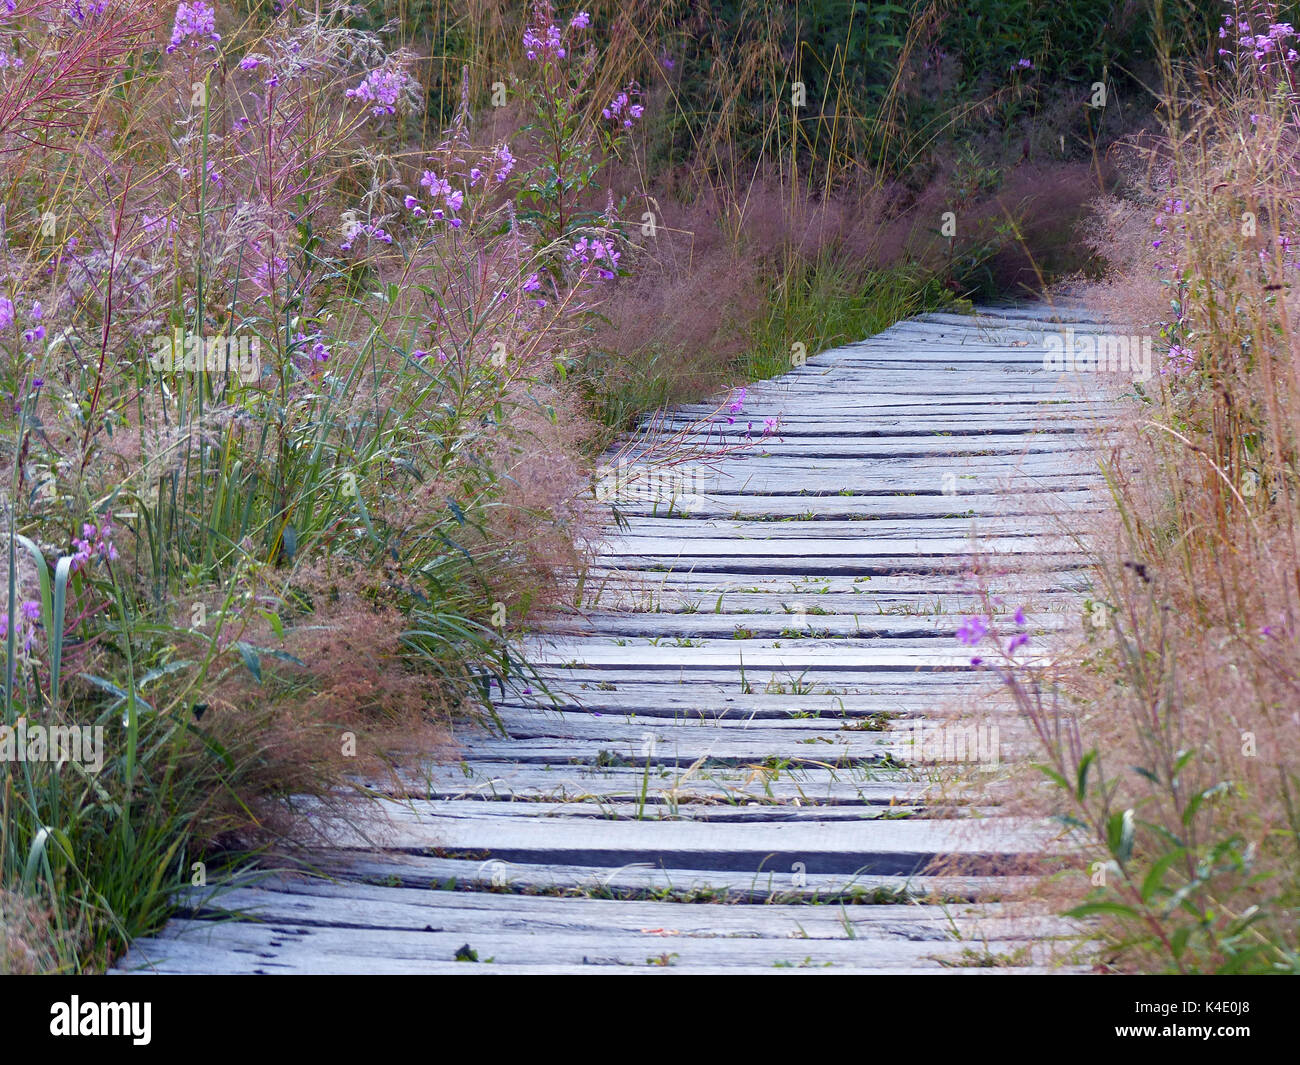 Safe Way Through The Moor, Lined With Fireweed, Log Paved Path In The Black Moor, Rhoen Stock Photo